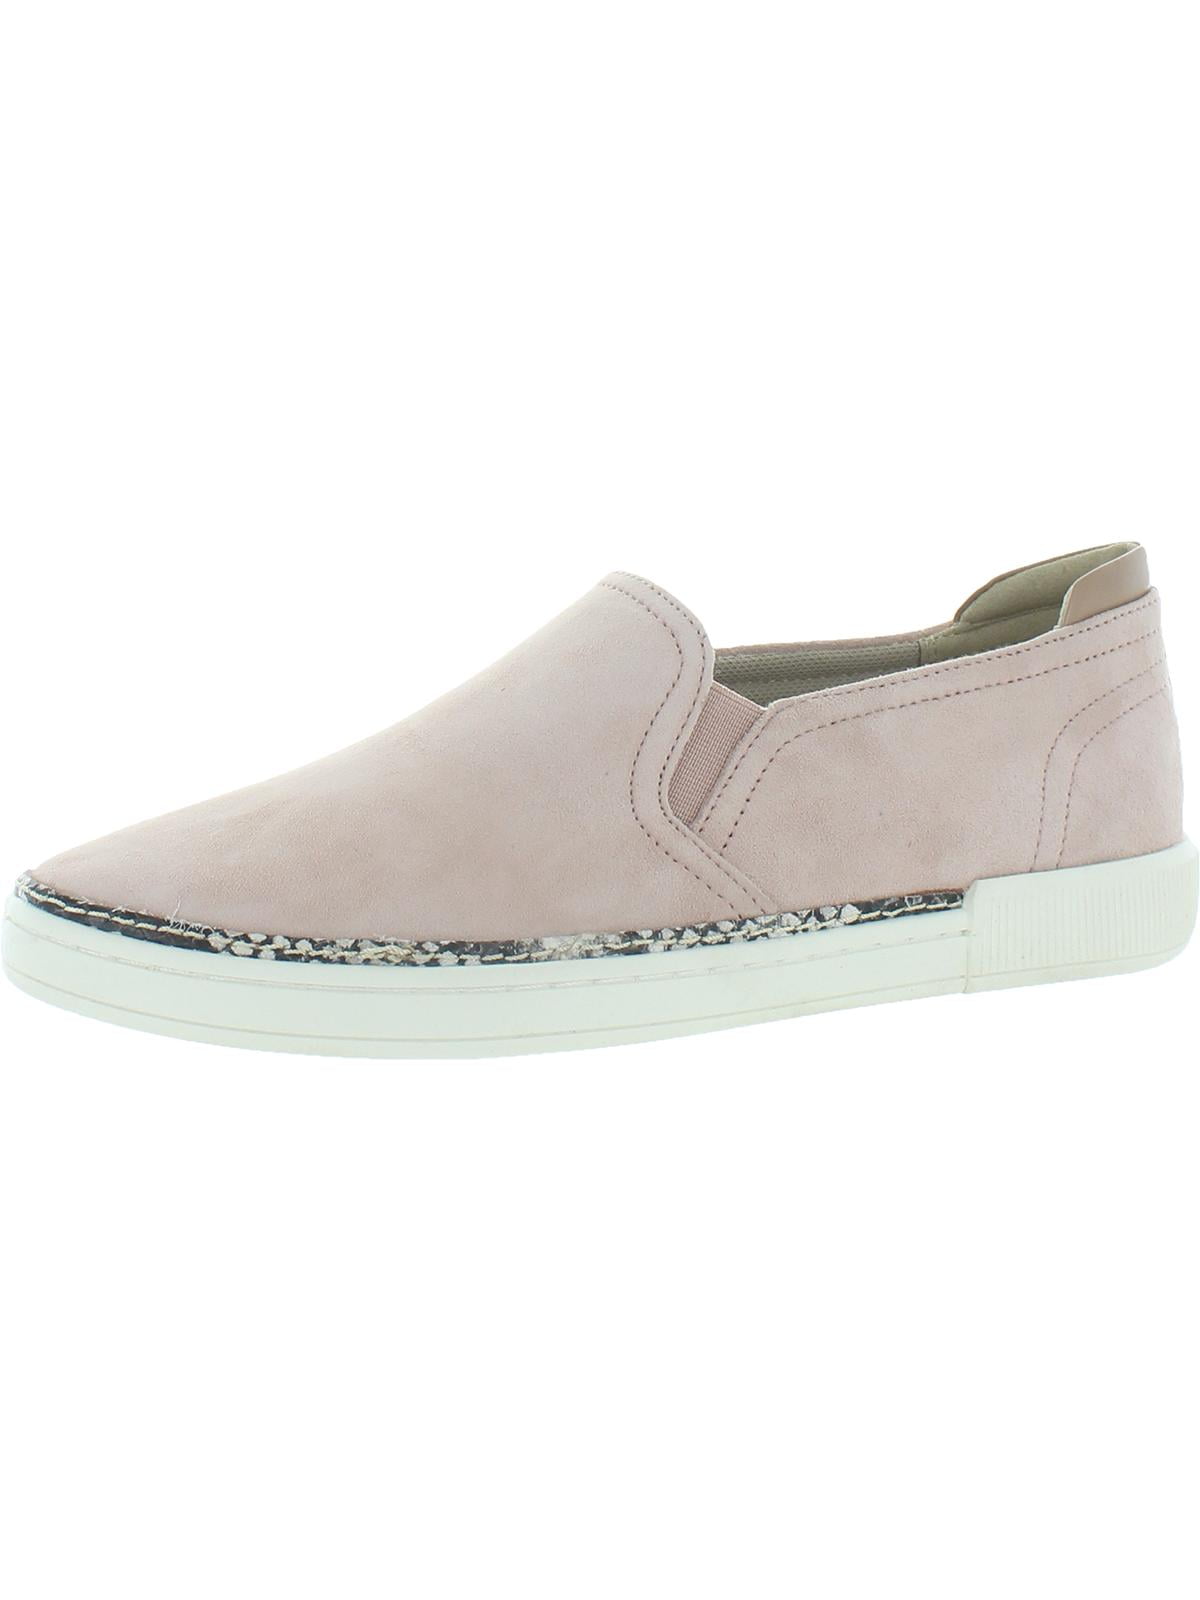 Naturalizer Womens Jade Suede On Slip-On Sneakers Pink Wide (C,D,W) -